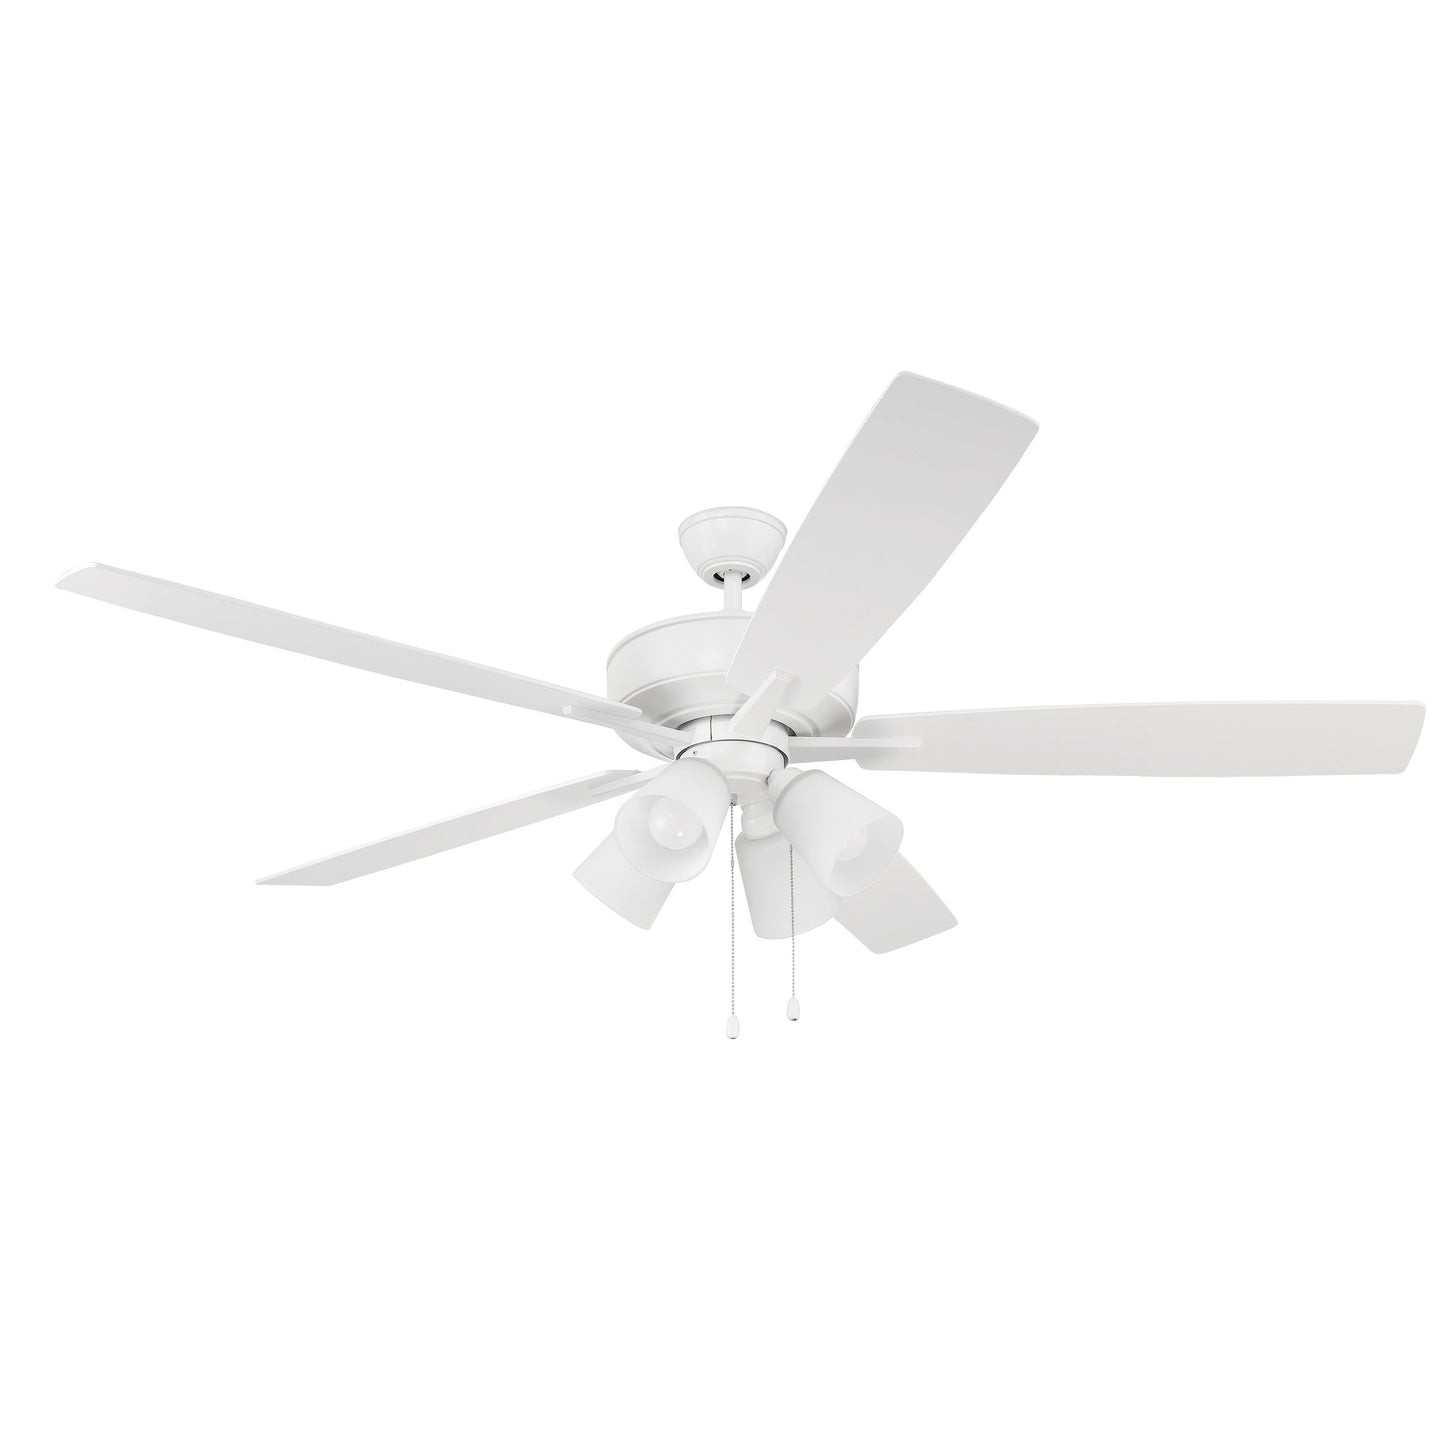 S114W5-60WWOK - Super Pro 114 60" 5 Blade Ceiling Fan with Light Kit - Pull Chain - White